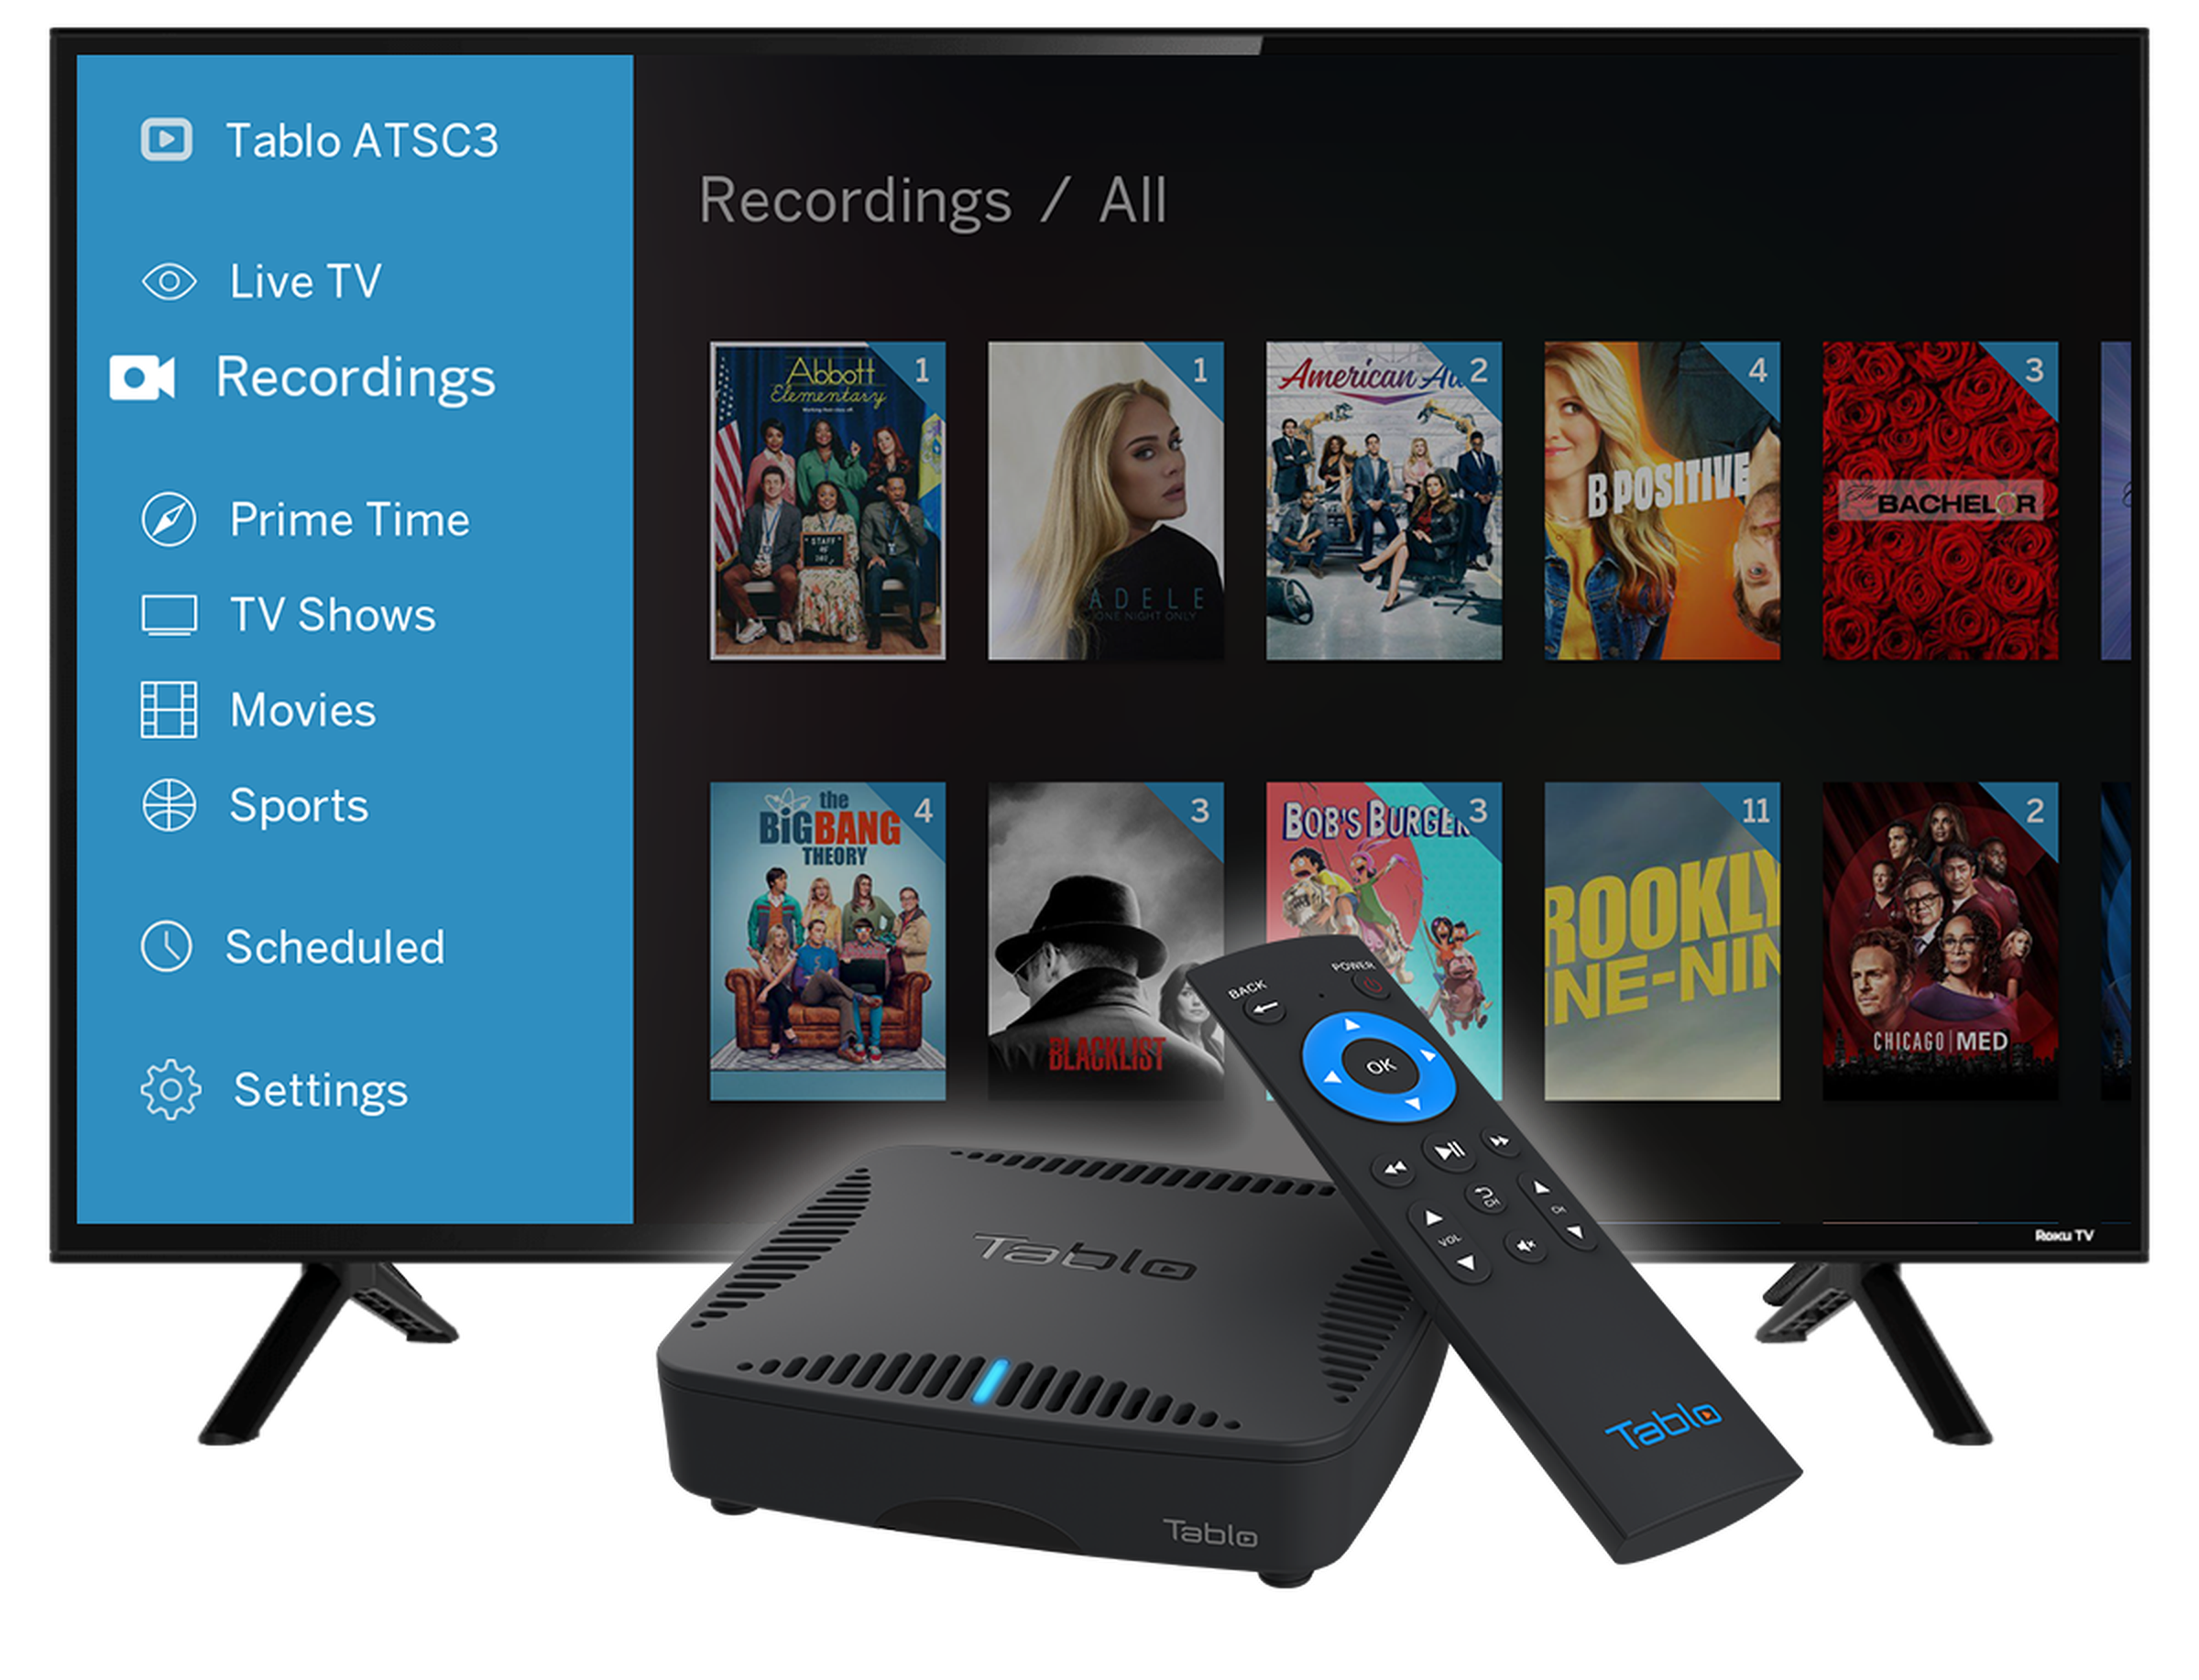 Tablo also offers a subscription-based TV guide service that unlocks additional filters and features.